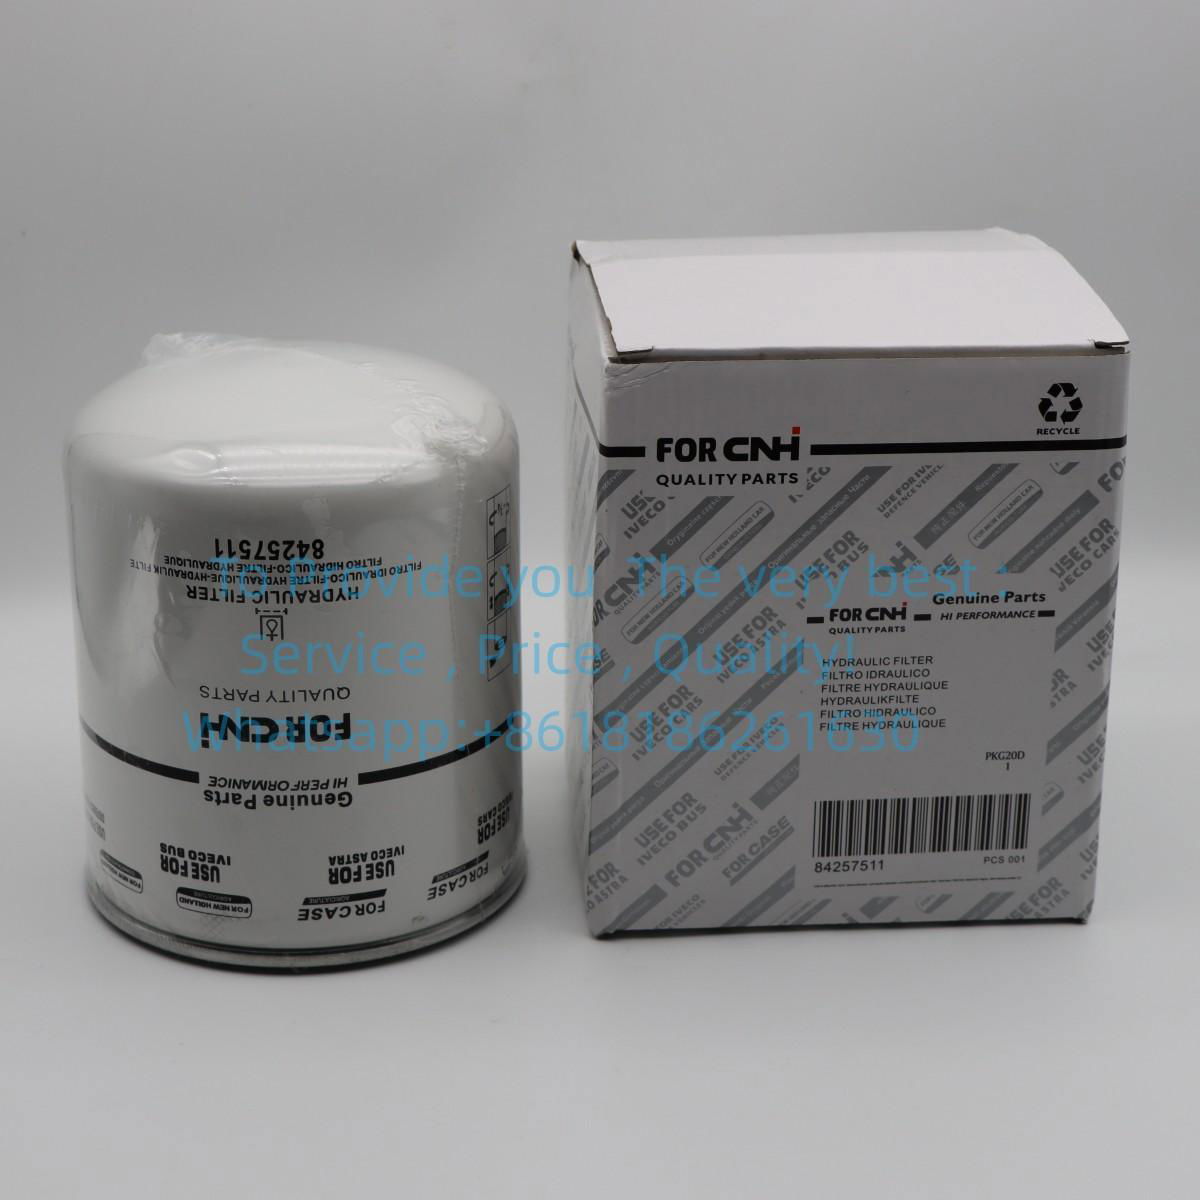 1909130  84257511  FOR NEW HOLLAND Oil Filter  HYDRAULIC FILTER 3